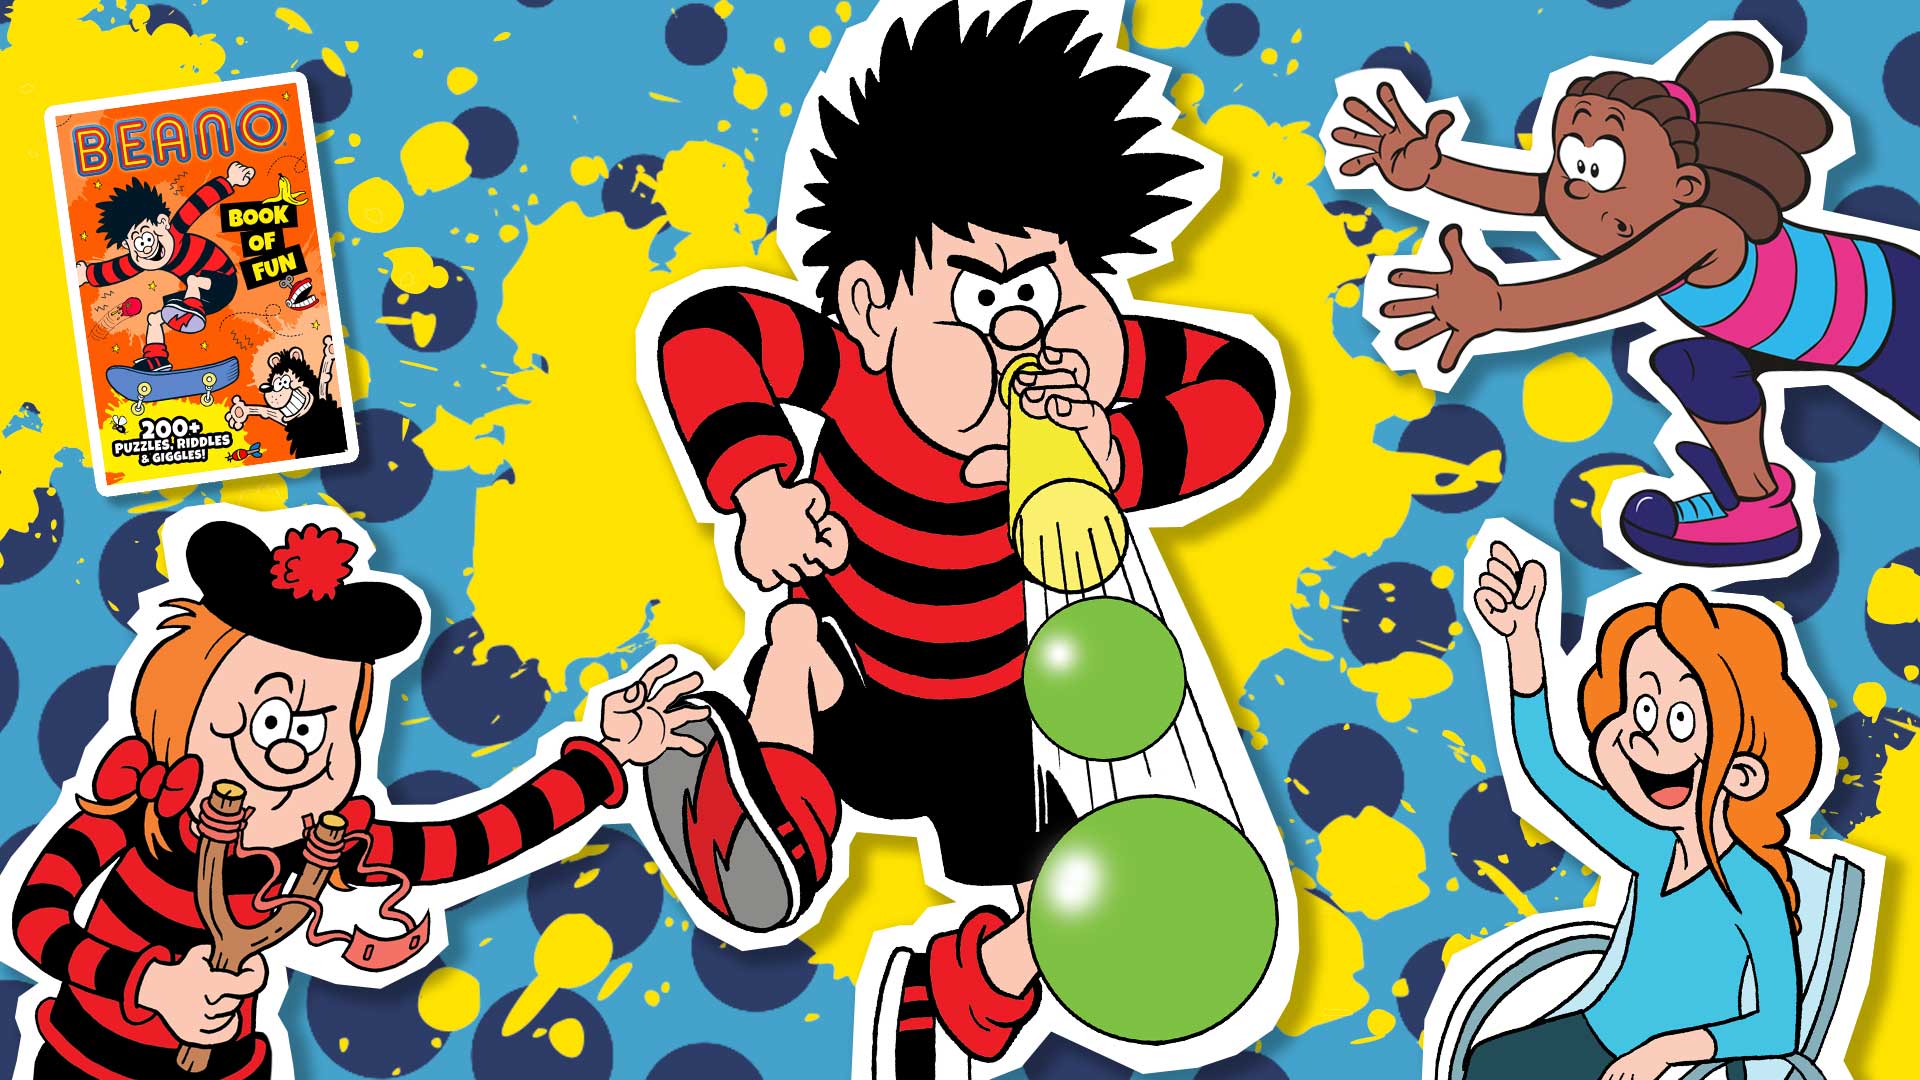 The Beano Book of Fun character personality quiz